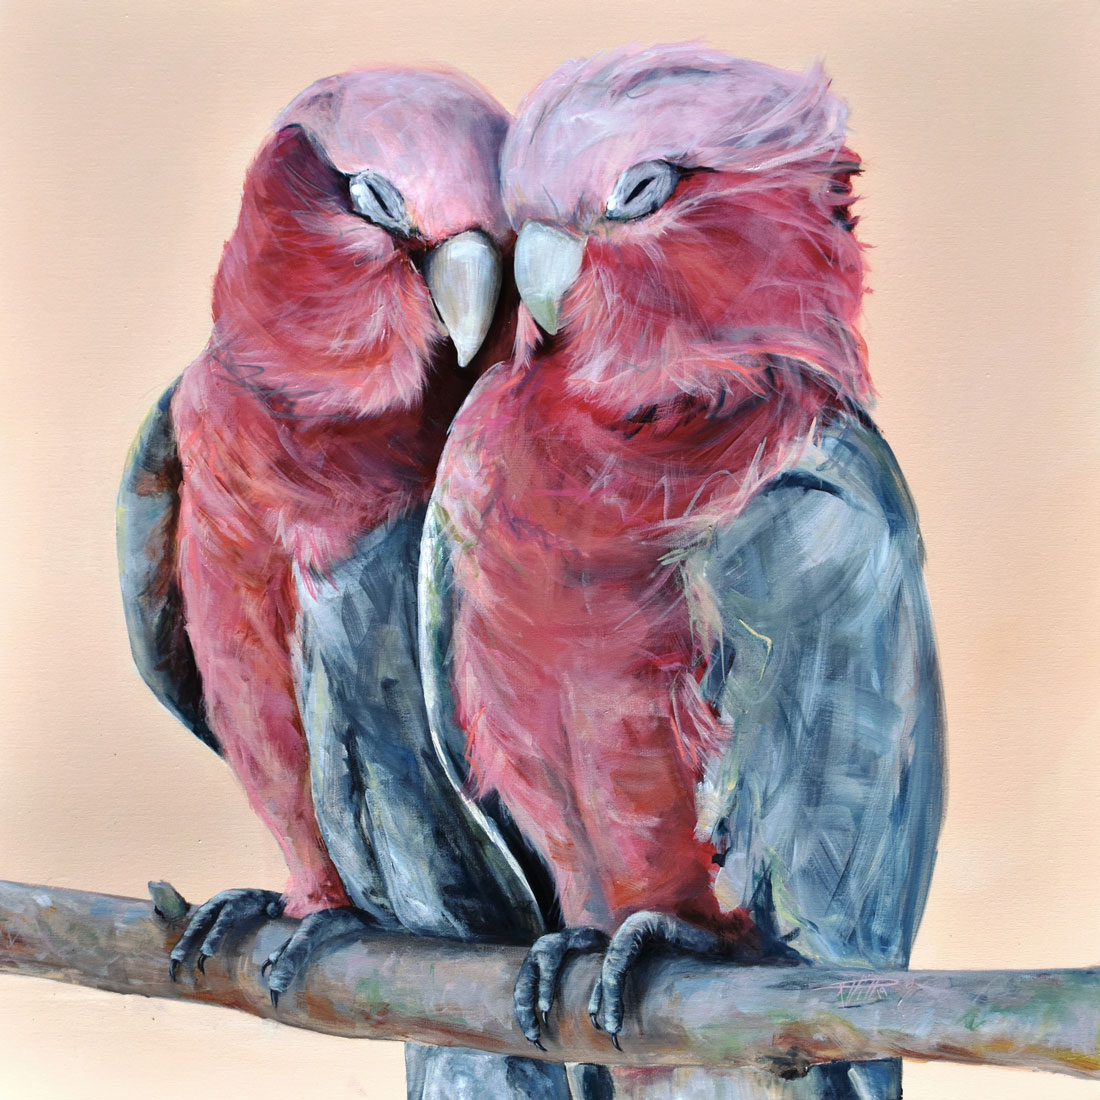 Galah Lovers by Rebecca Hill. Original paintings for sale on Bluethumb, the home of Australian art.